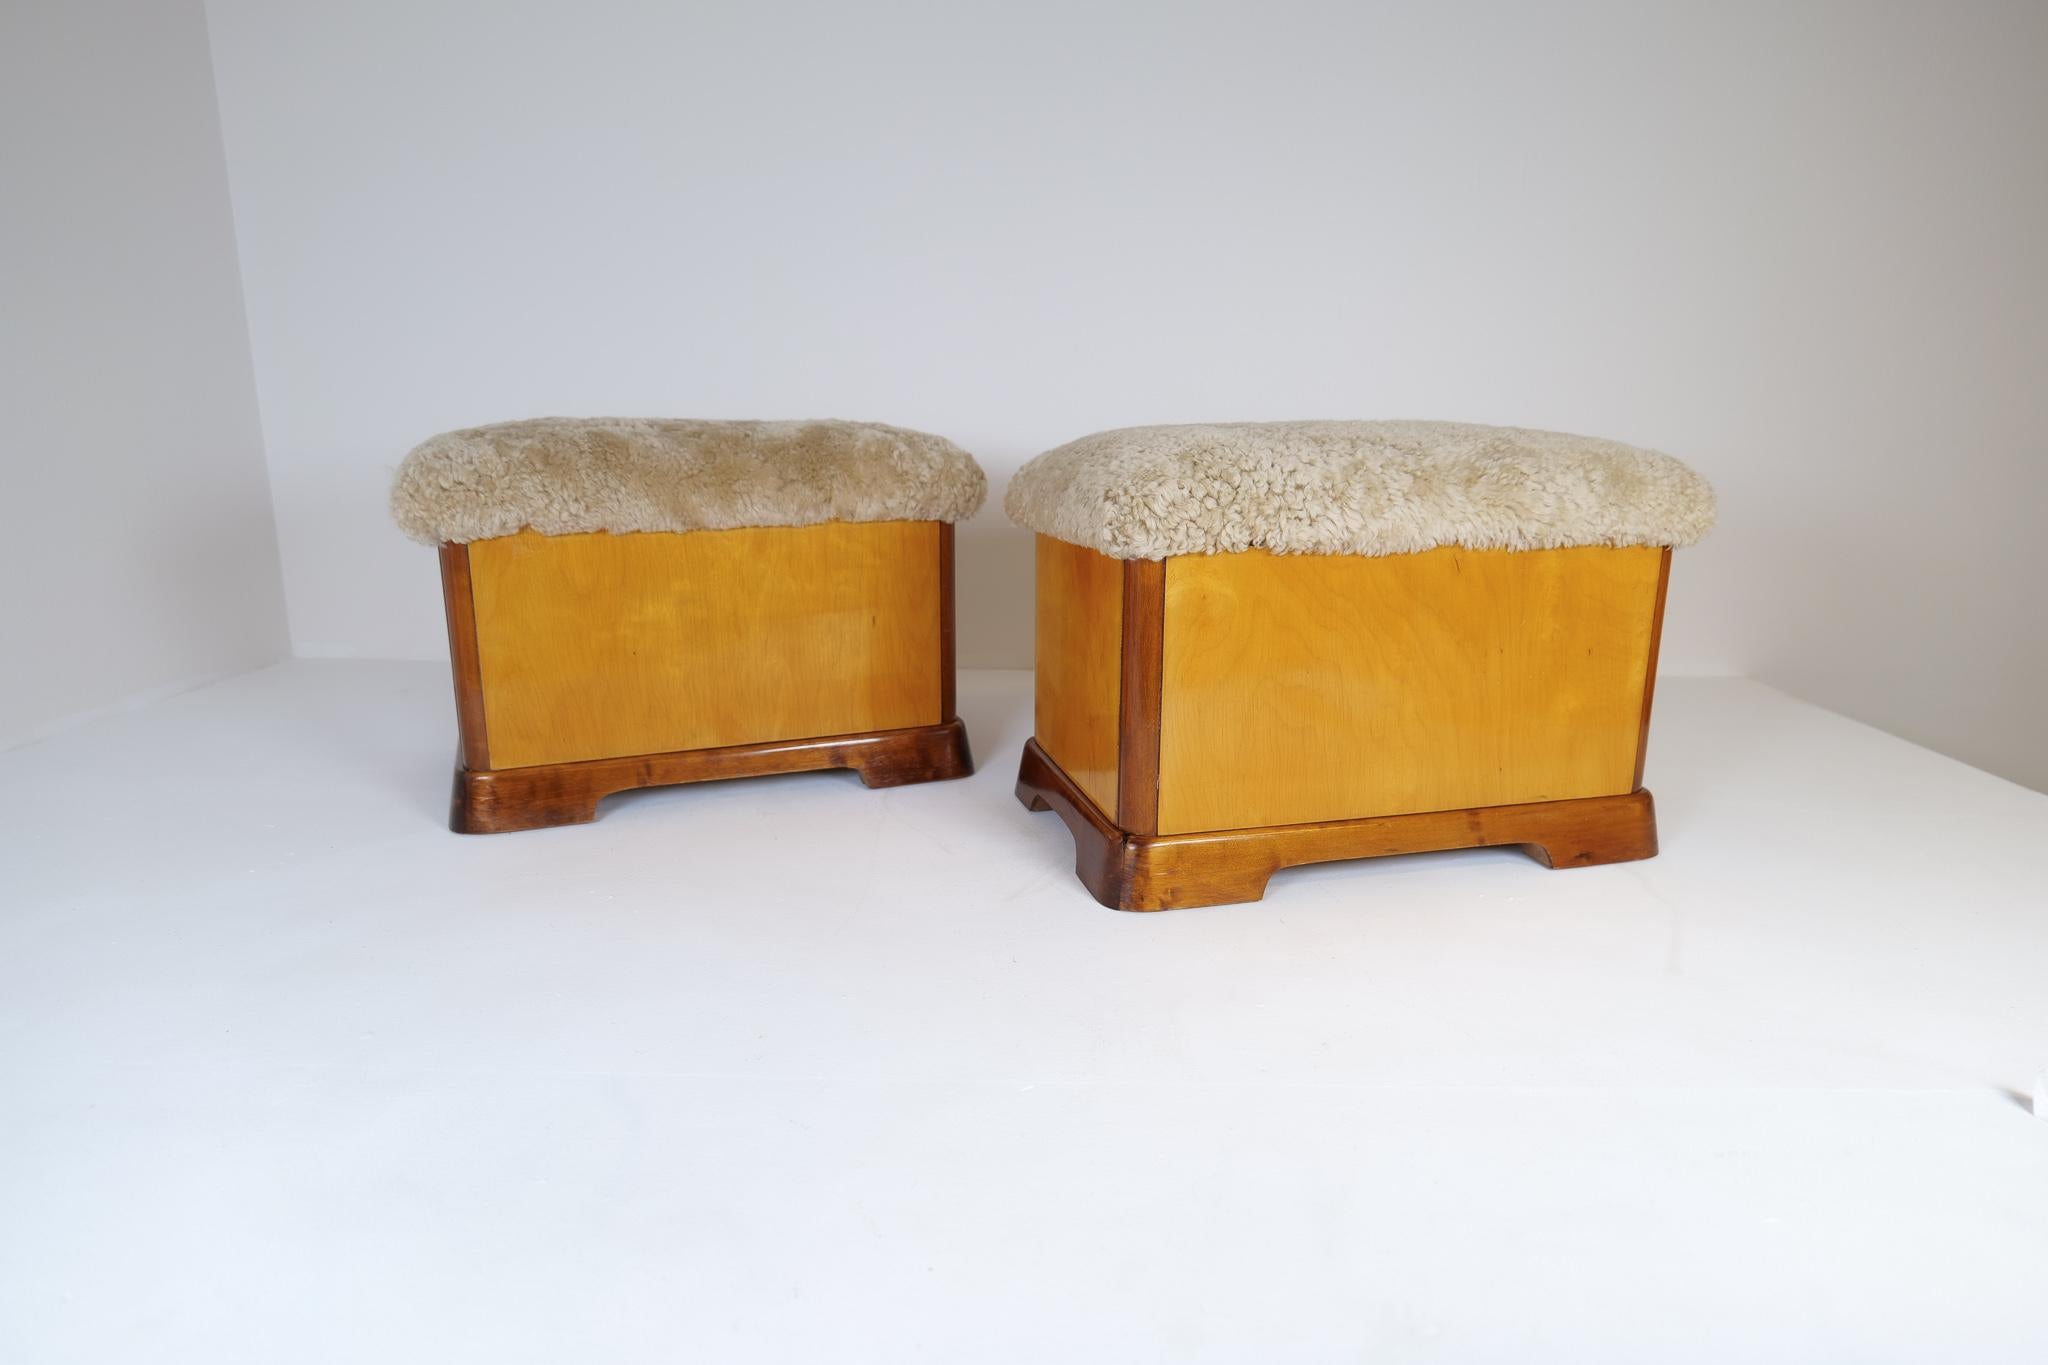 Swedish Art Deco Stools in Lacquered Birch and Sheepskin/Shearling Seat 1940s In Good Condition For Sale In Hillringsberg, SE